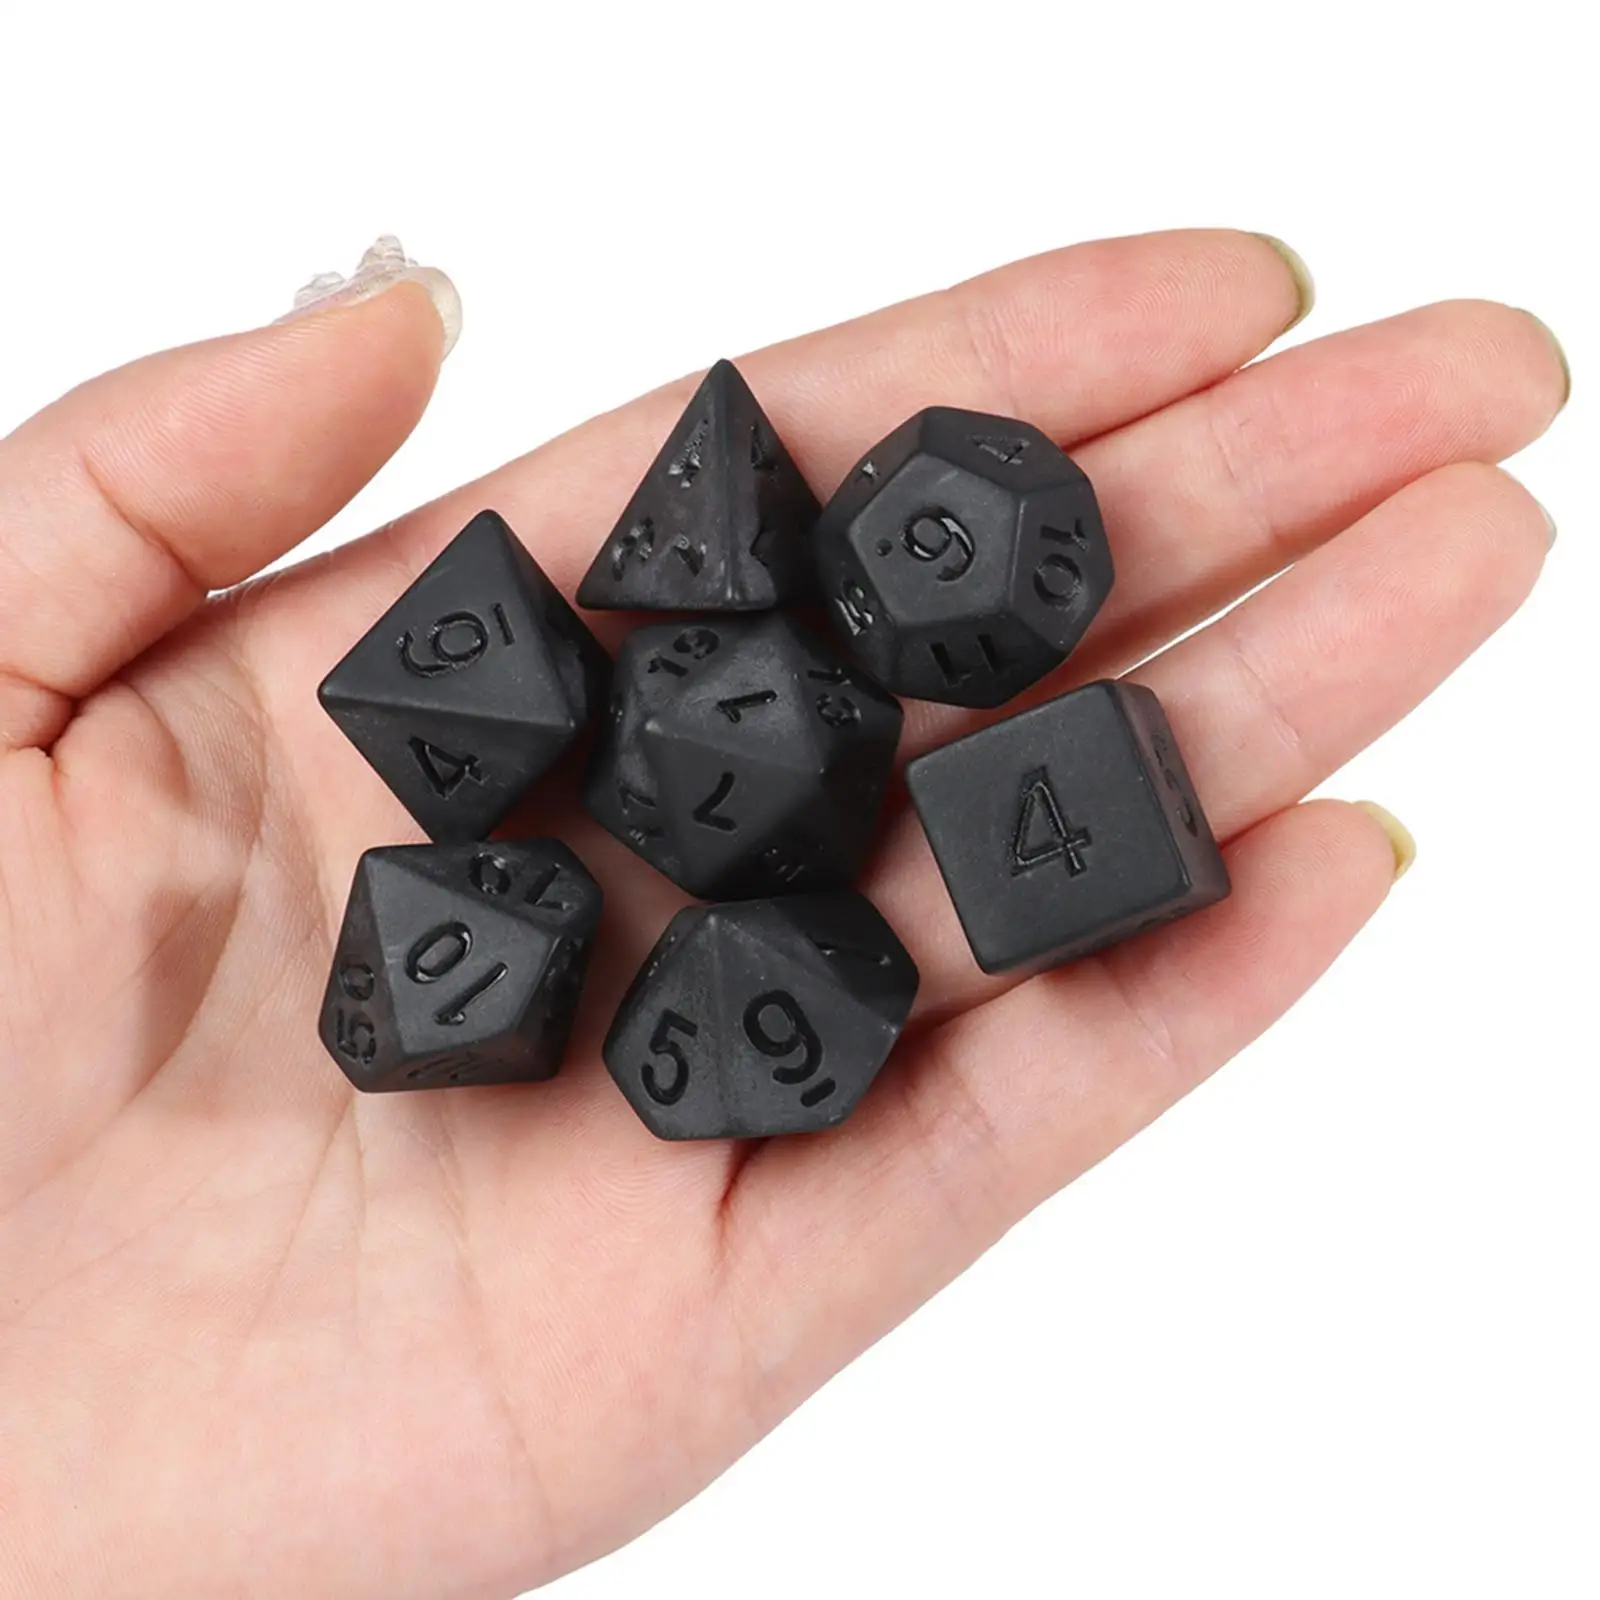 7x Polyhedral Dices Set D4 D6 D8 D10 D12 D20 Multi Side Dice Board Game Accessories for RPG Role Playing Table Games Party Favor